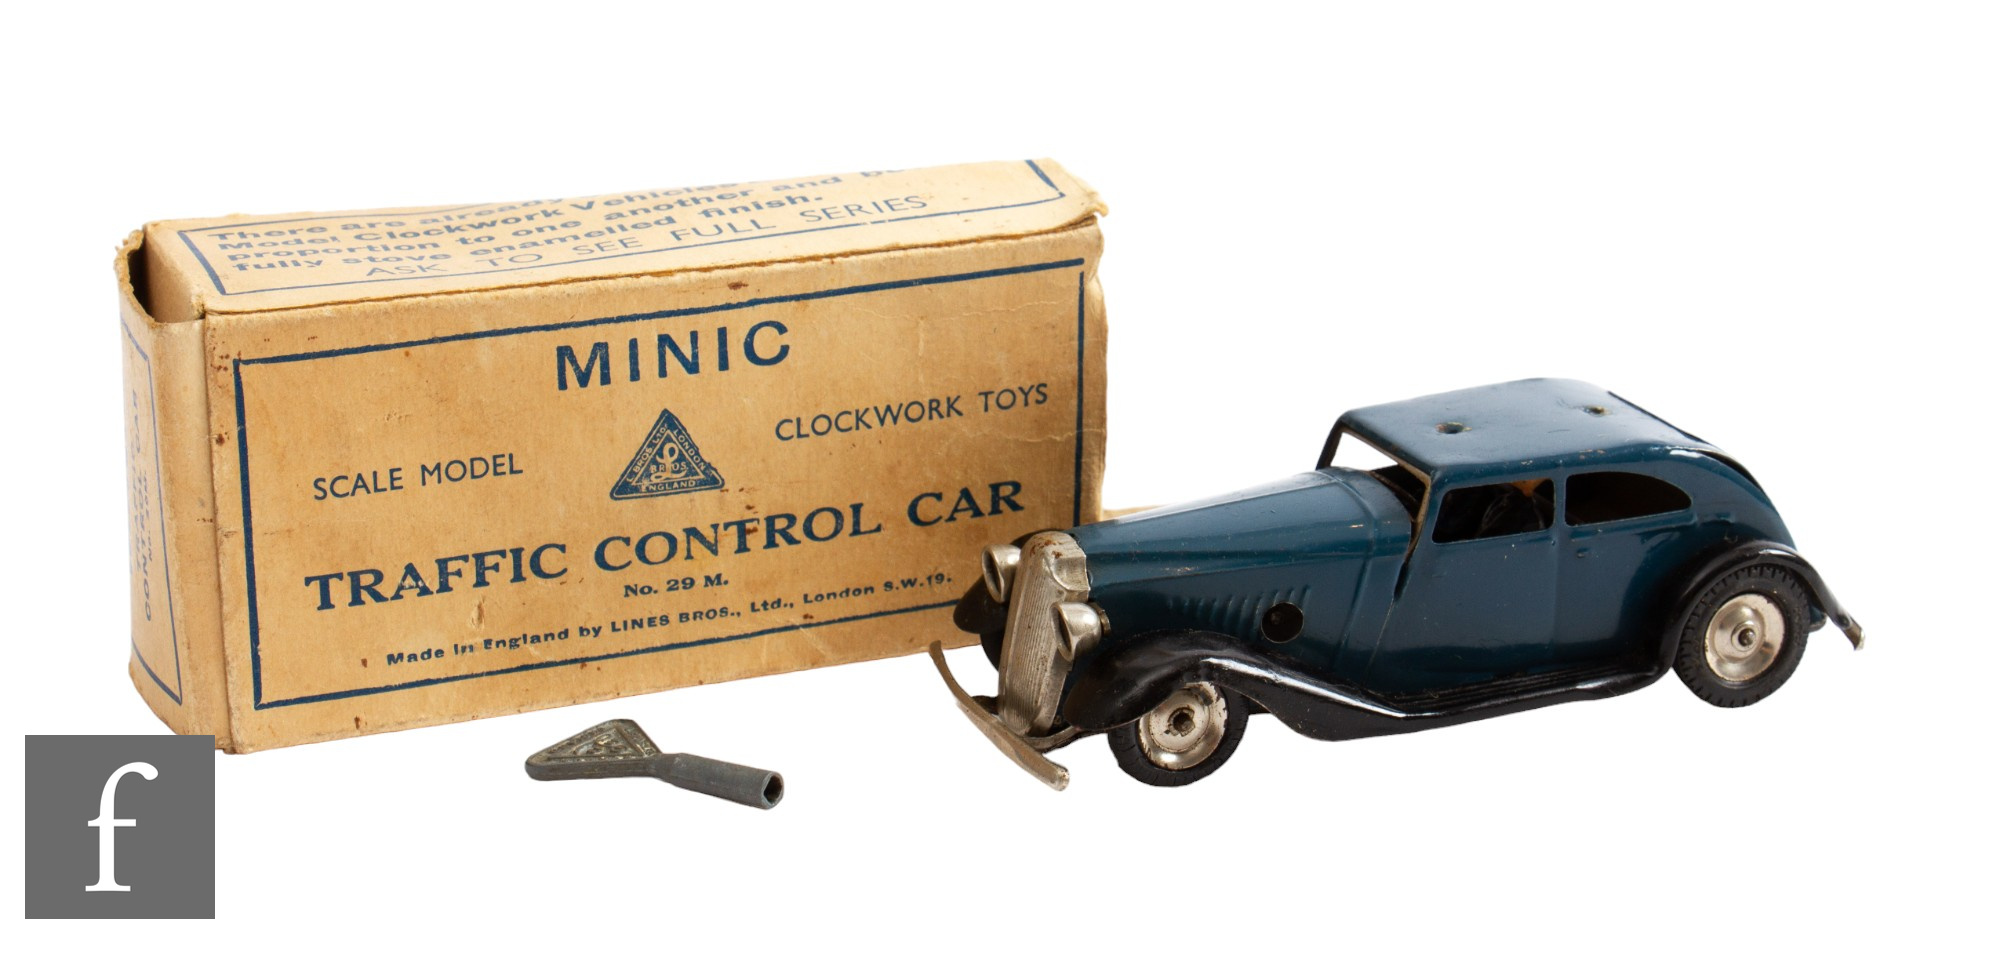 A Triang Minic Vauxhall Traffic Control Car, in dark blue and black with two policeman figures,